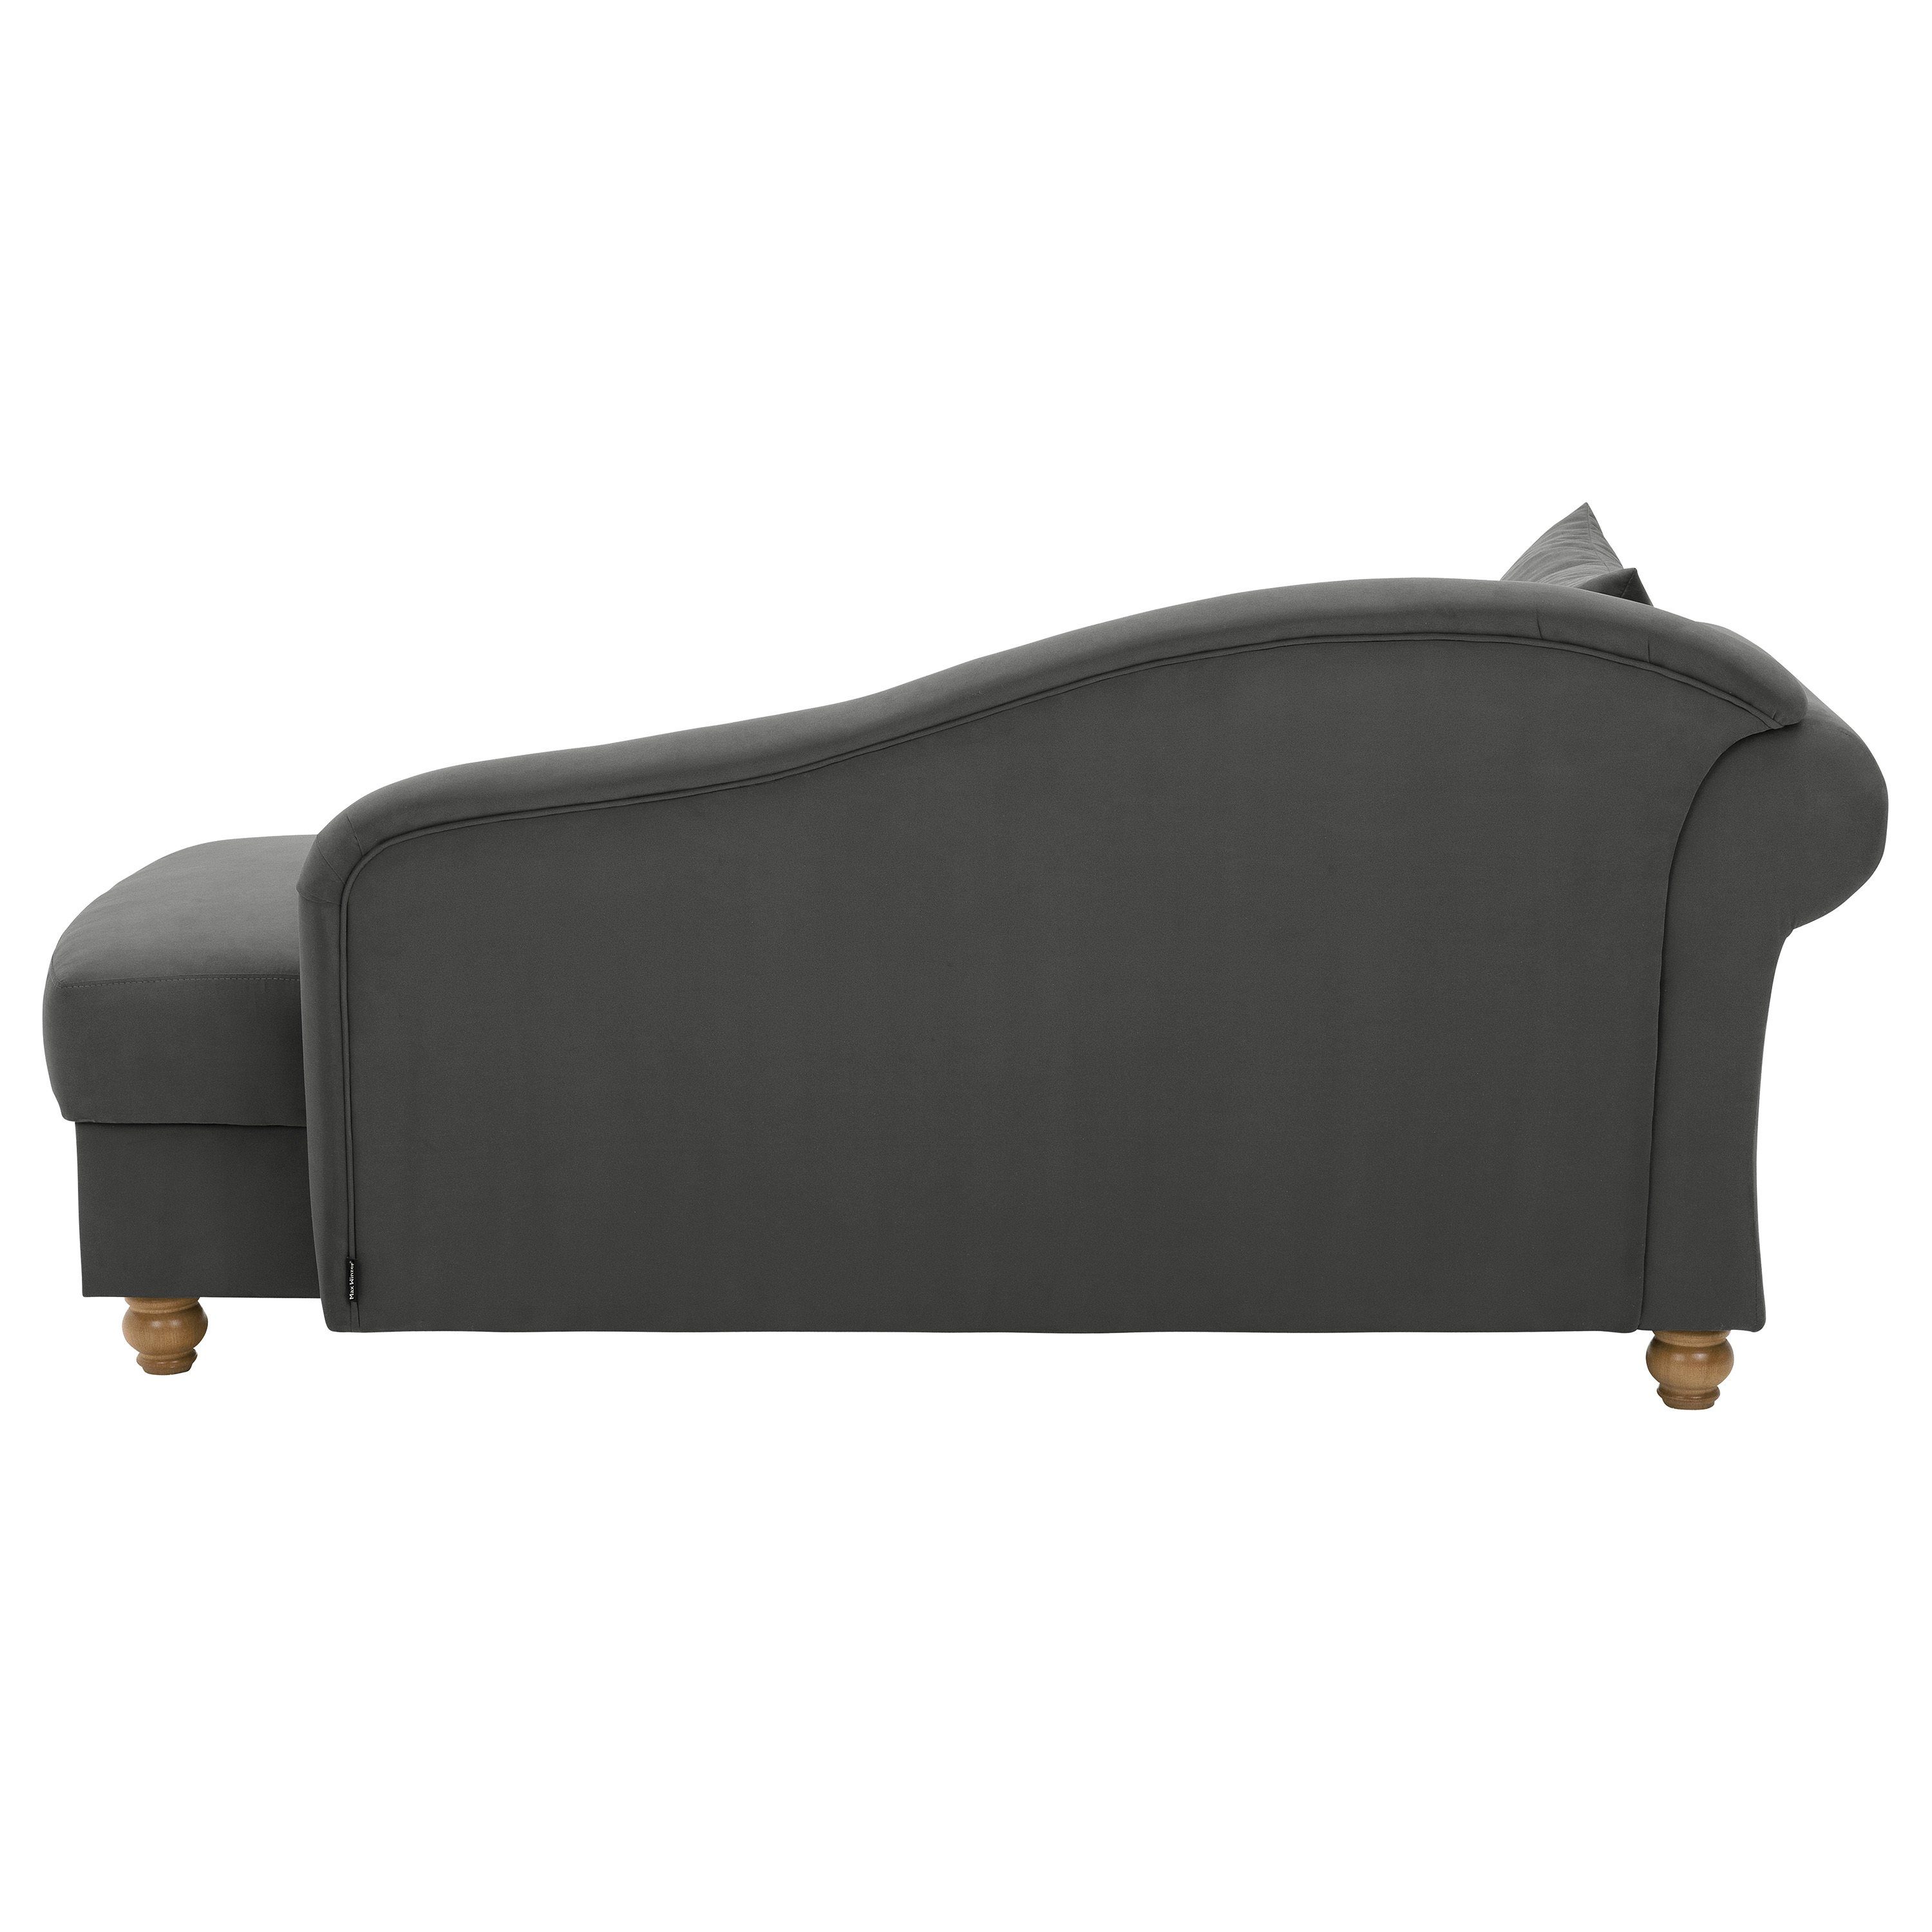 Max links Evelyn, Sofa Armlehne Recamiere Winzer®